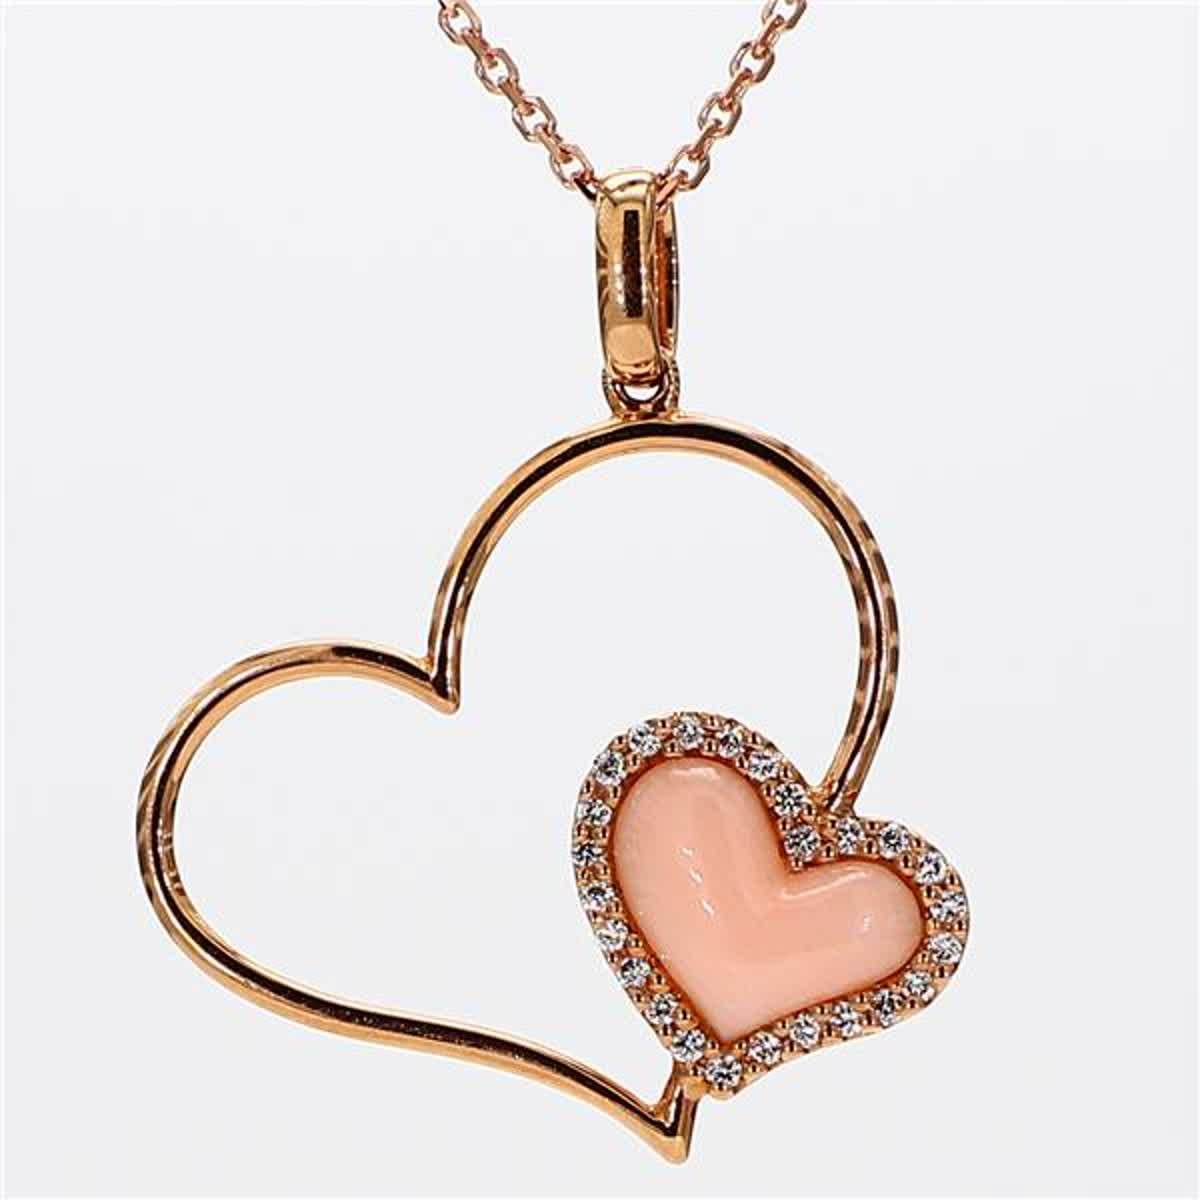 RareGemWorld's classic pink shell pendant. Mounted in a beautiful 18K Rose Gold setting with a butterfly shape natural pink shell. The shell is complimented by natural round white diamond melee in a beautiful heart-shape. This pendant is guaranteed